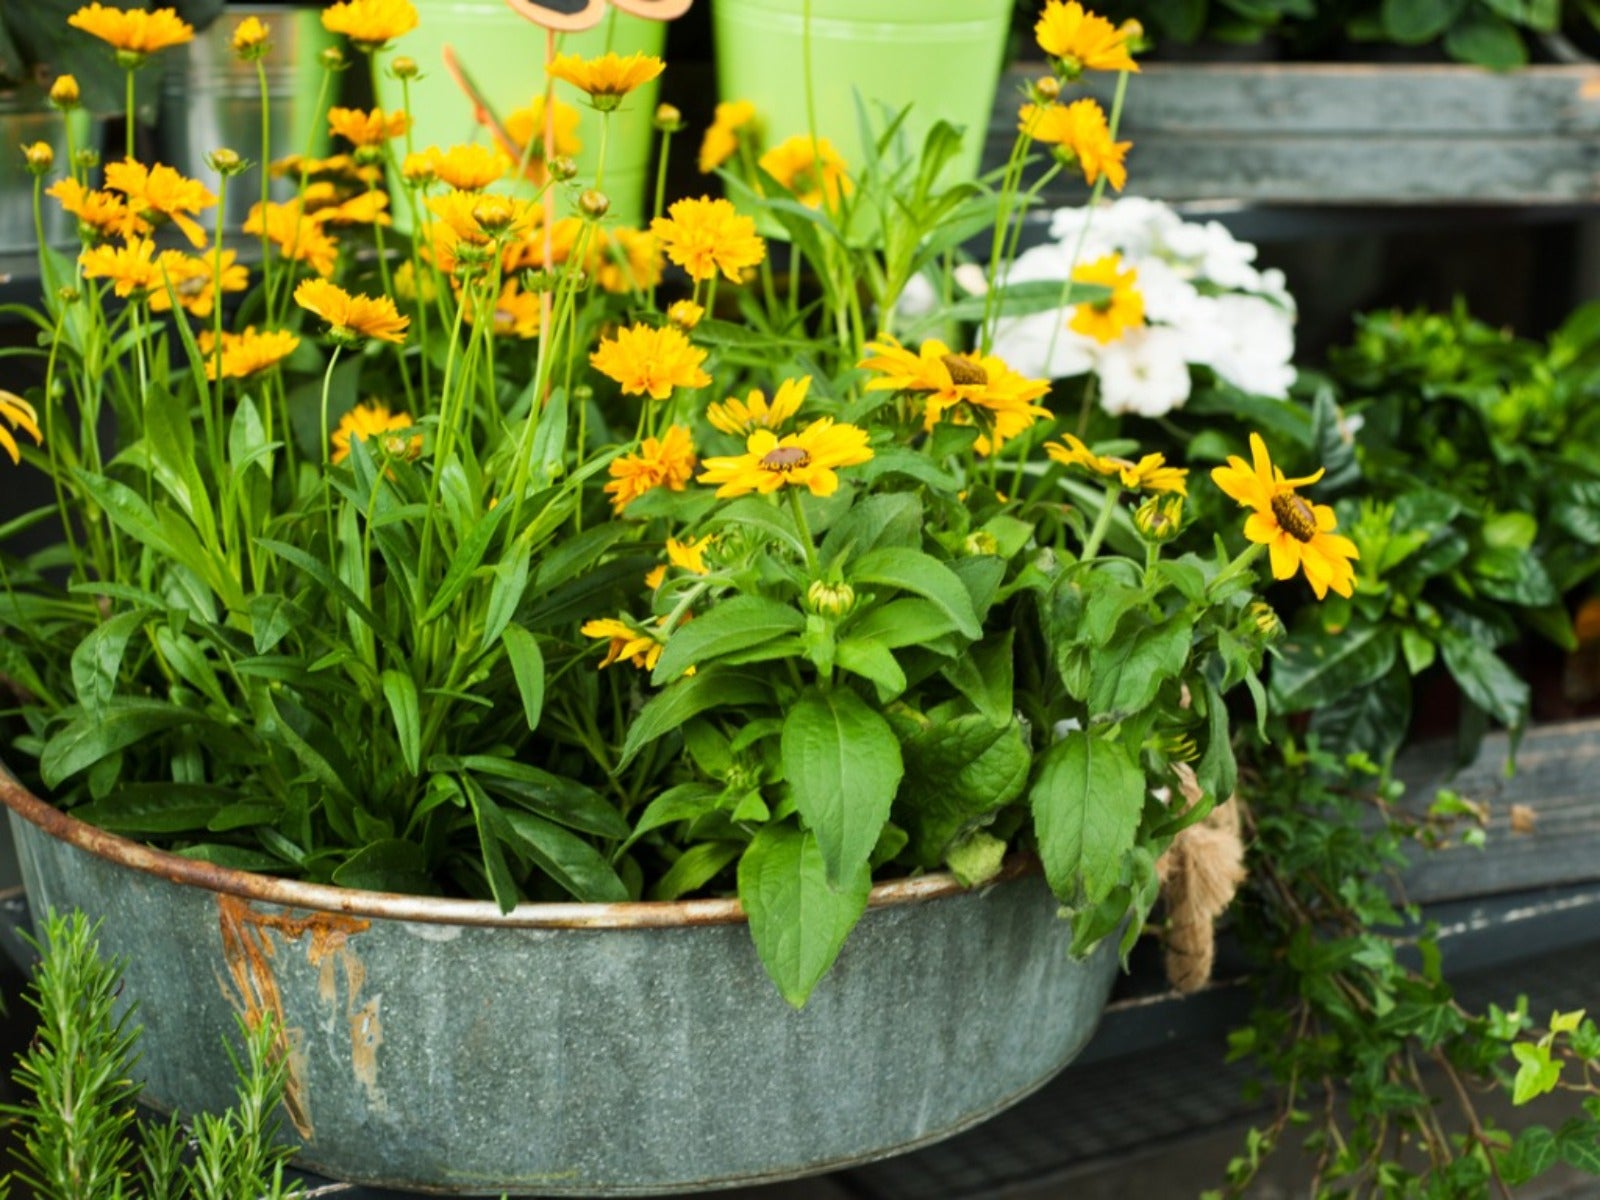 Yellow flowers growing in a low metal container